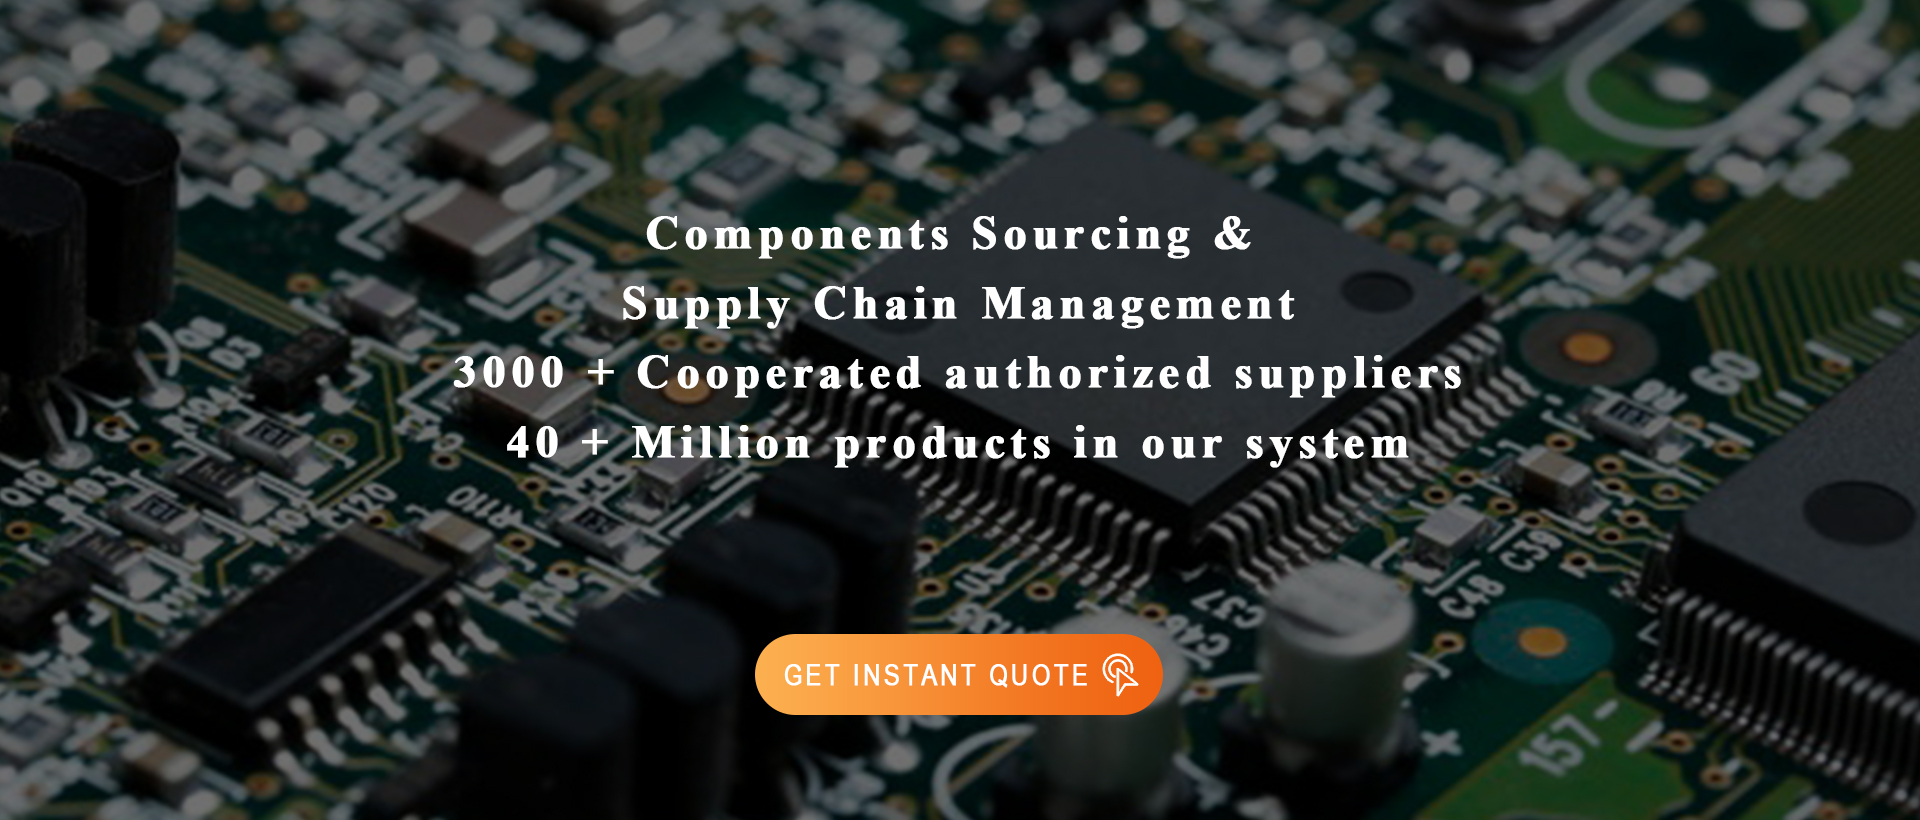 Components Sourcing & Supply Chain Management